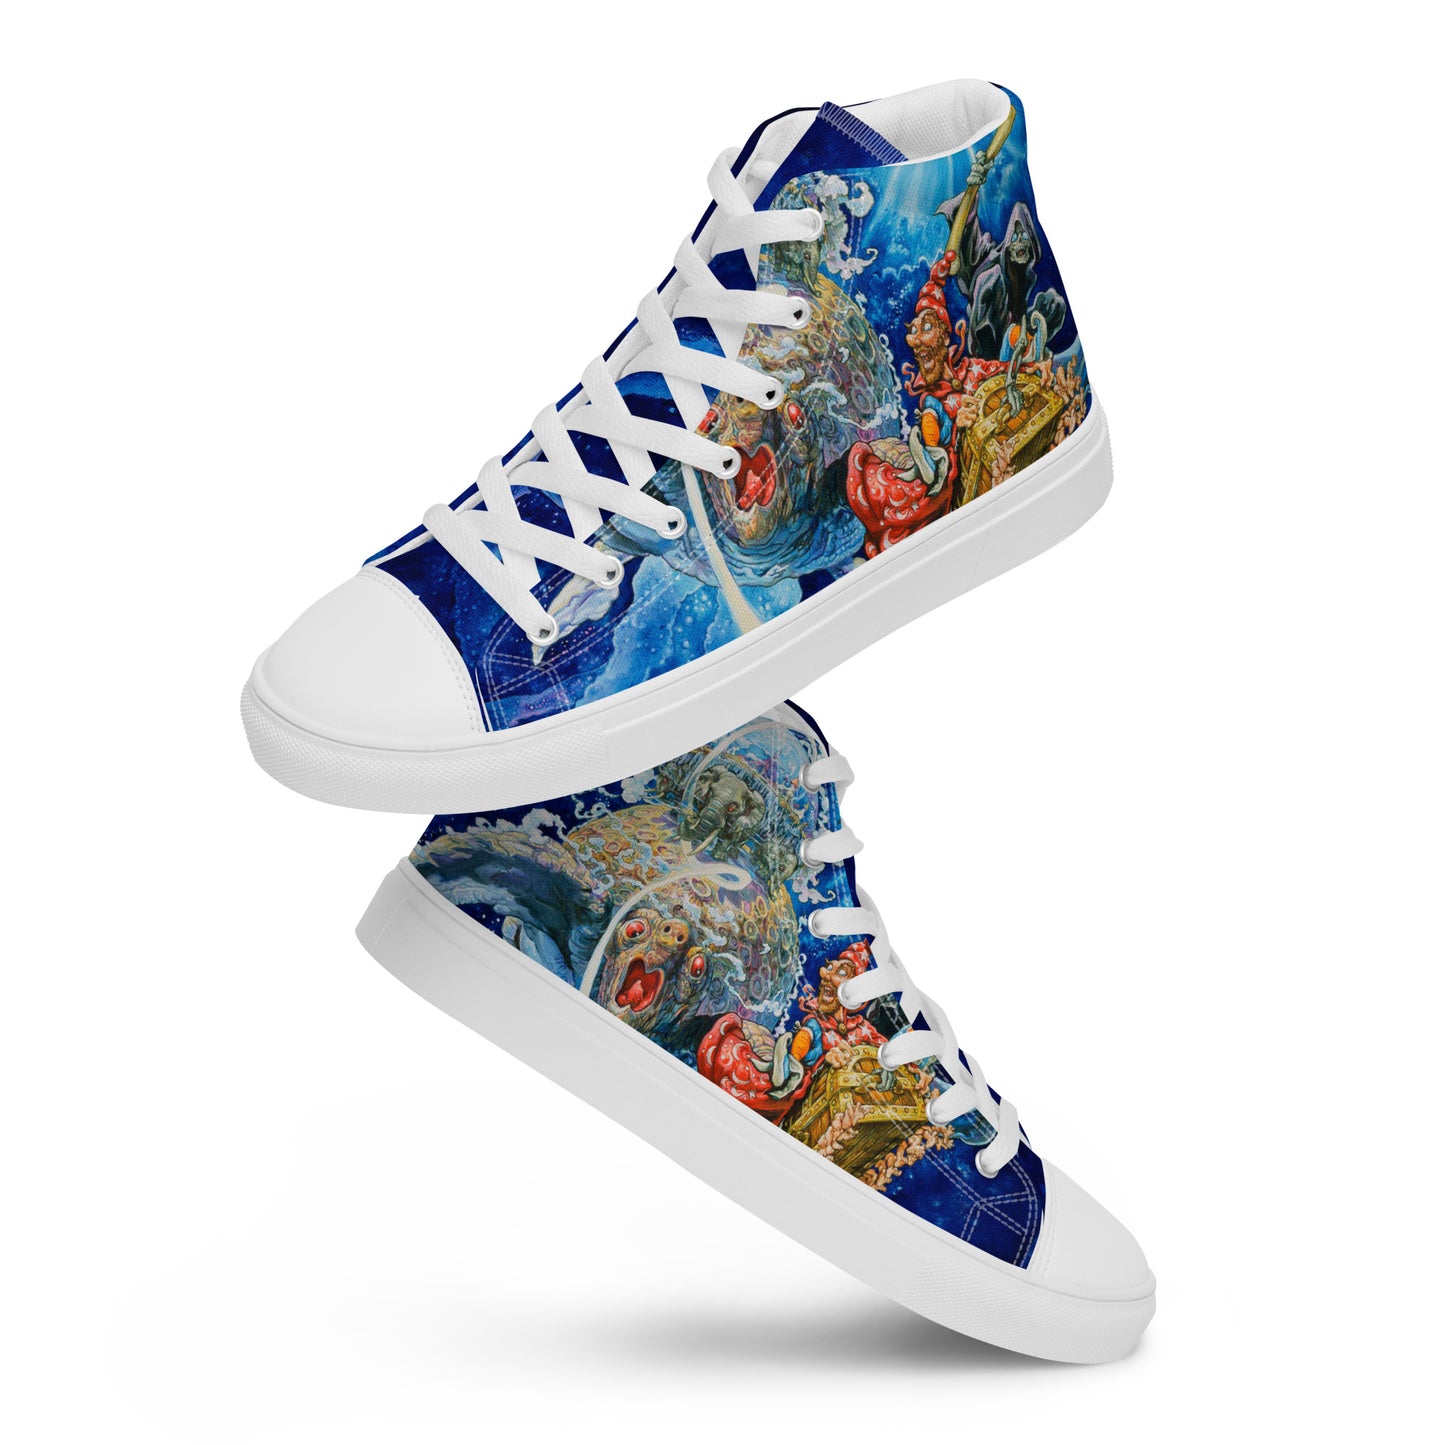 Discworld III Women’s High Top Canvas Shoes - Free Shipping! *US SIZES SHOWN! USE CHART!